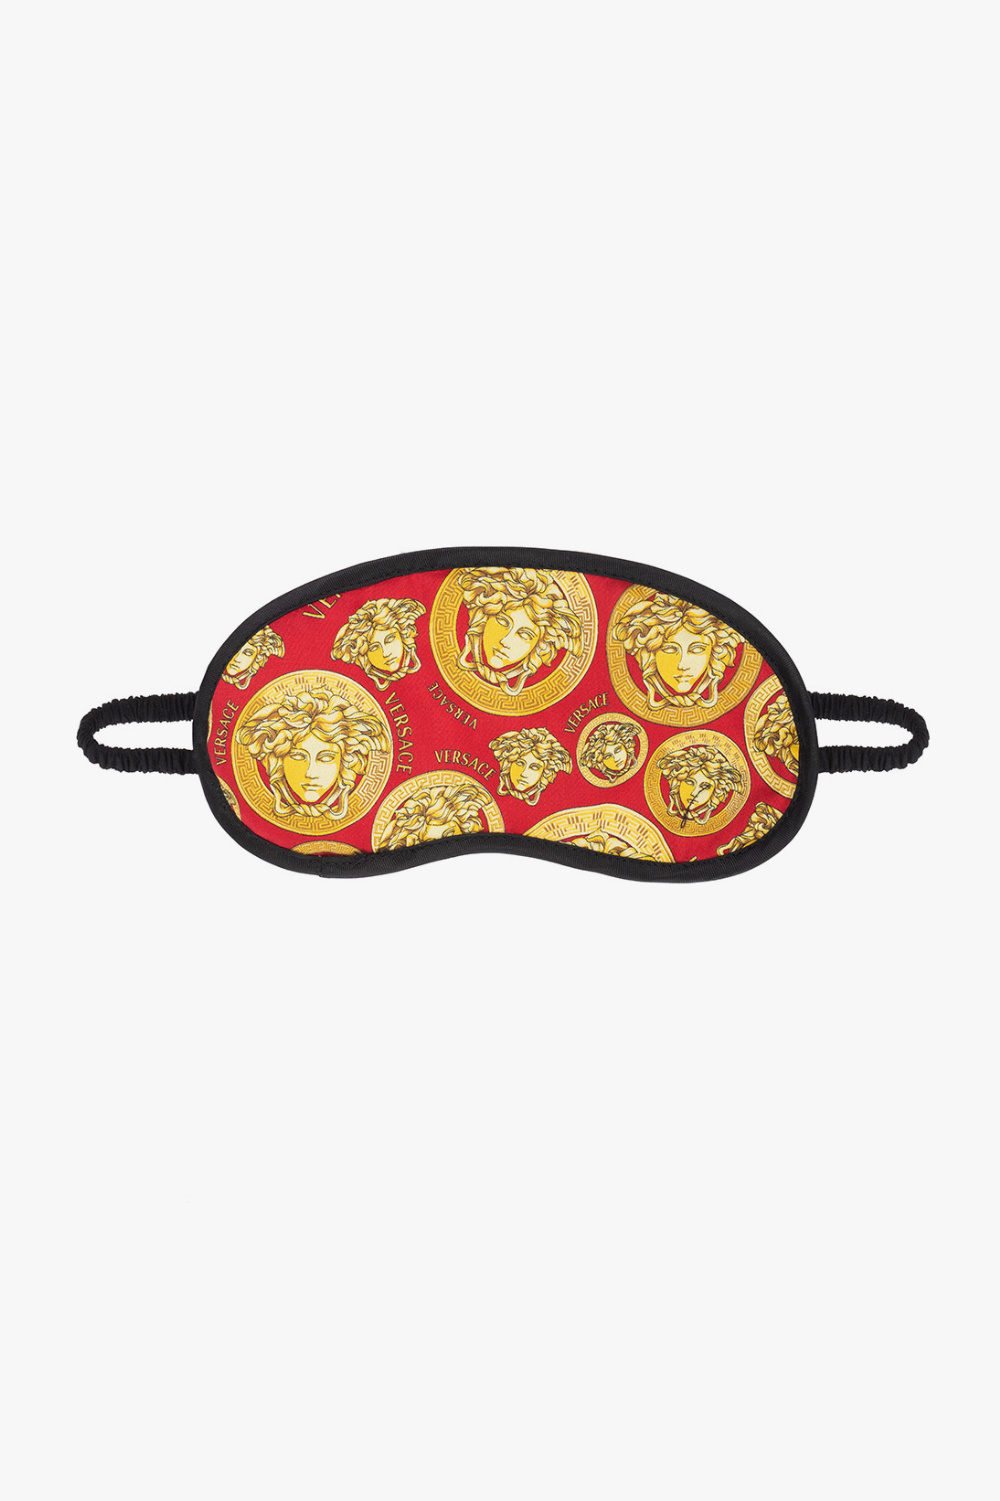 Versace Home Typo eye mask with slogan 'tranquil af'